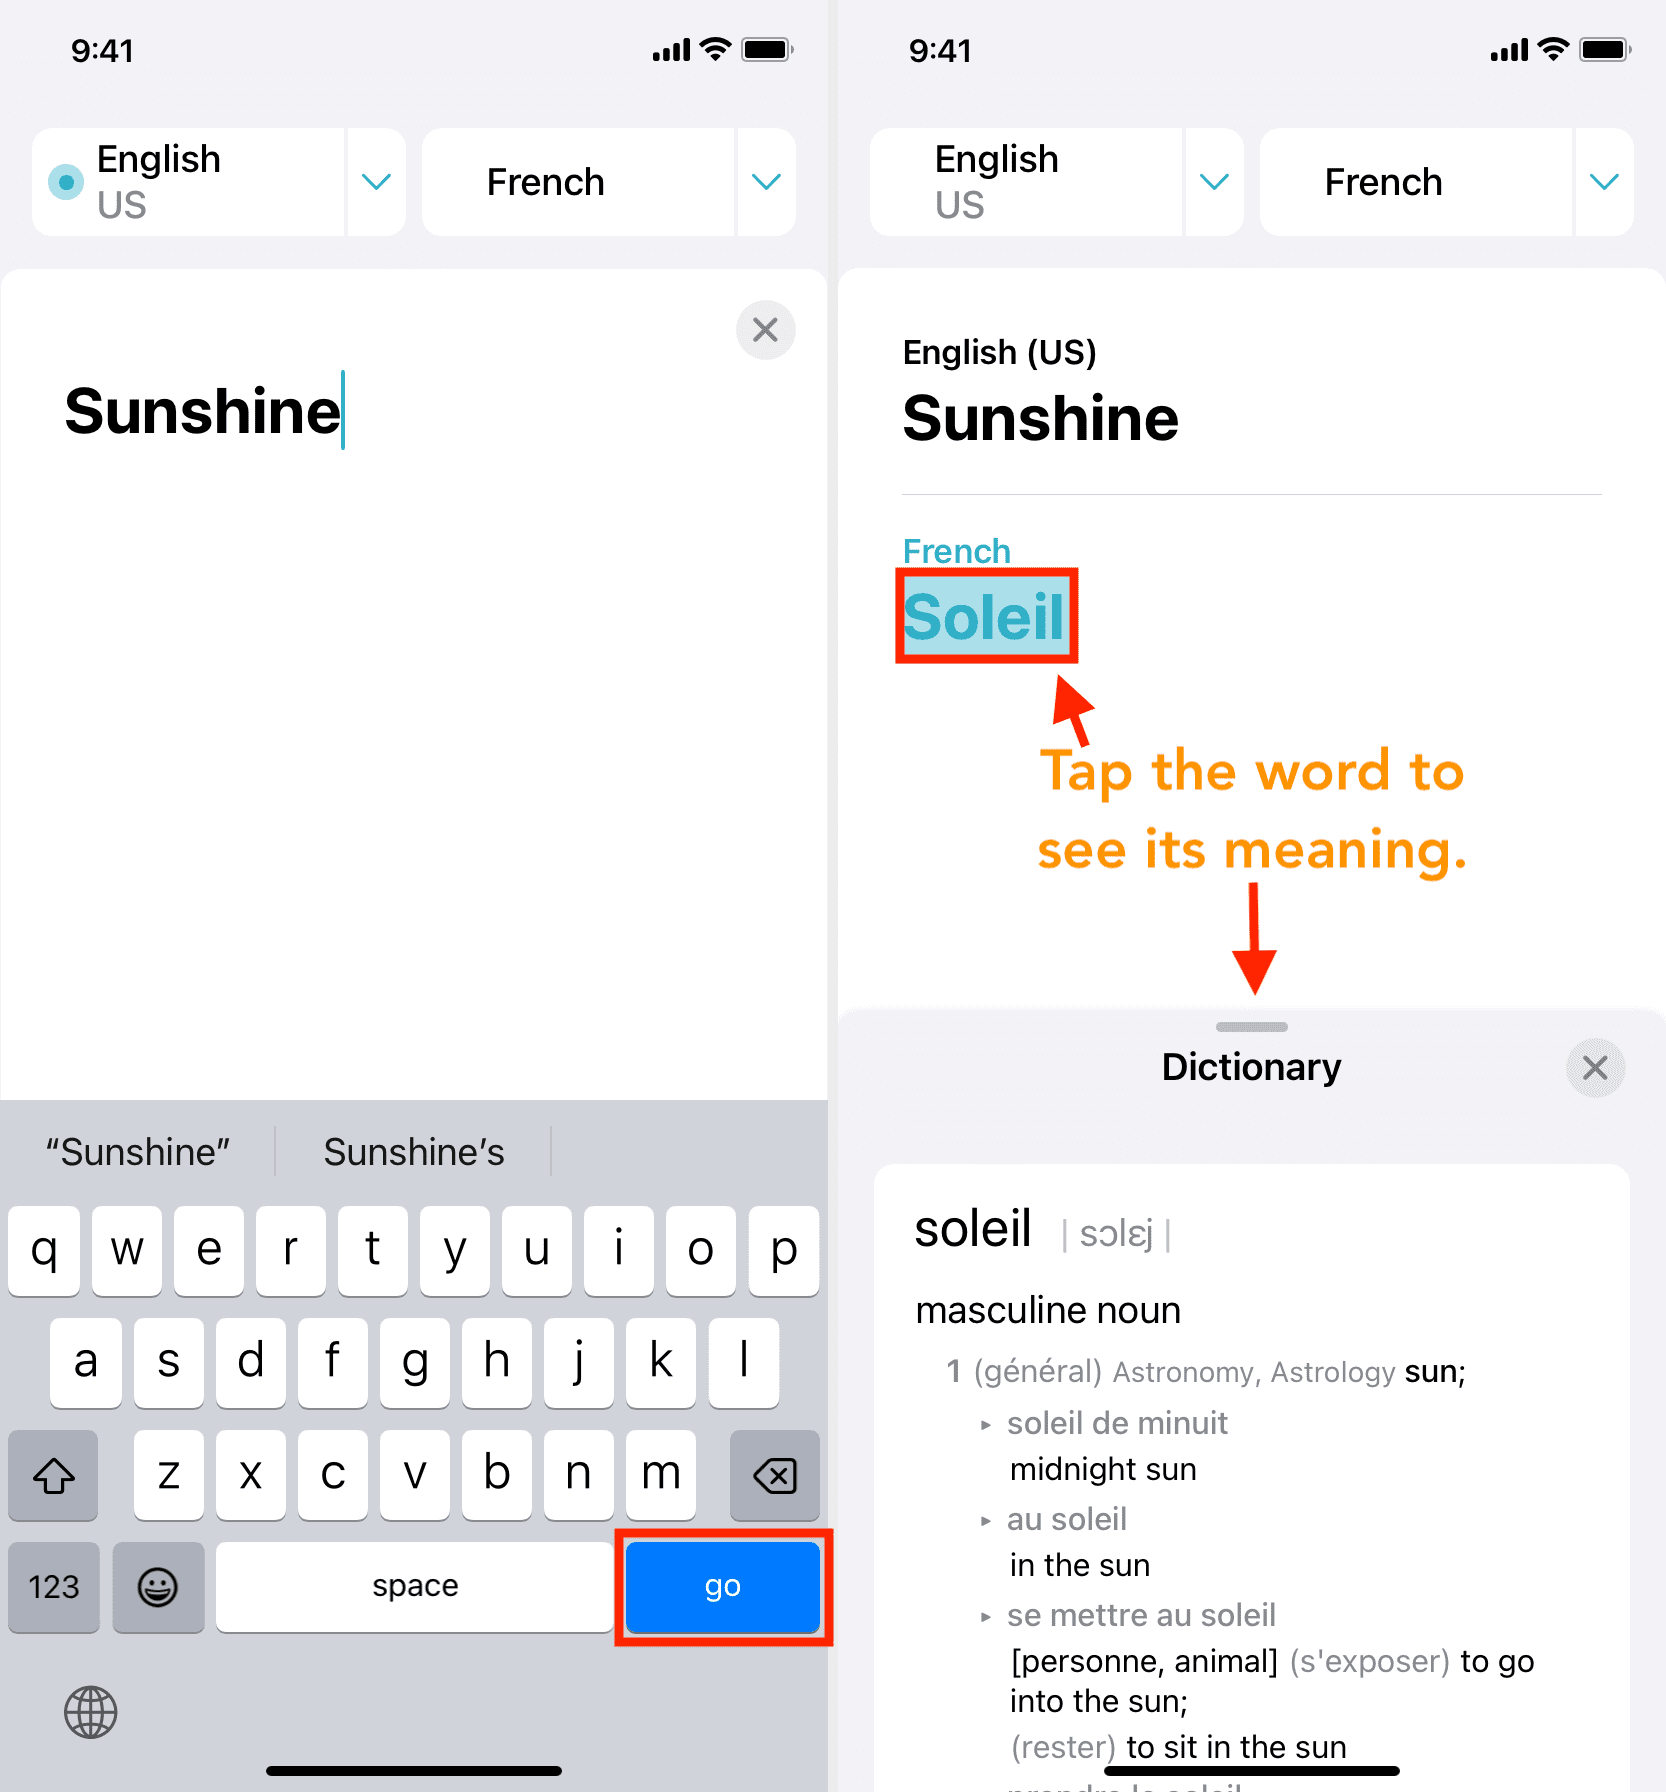 See meaning of word in iPhone Translate app